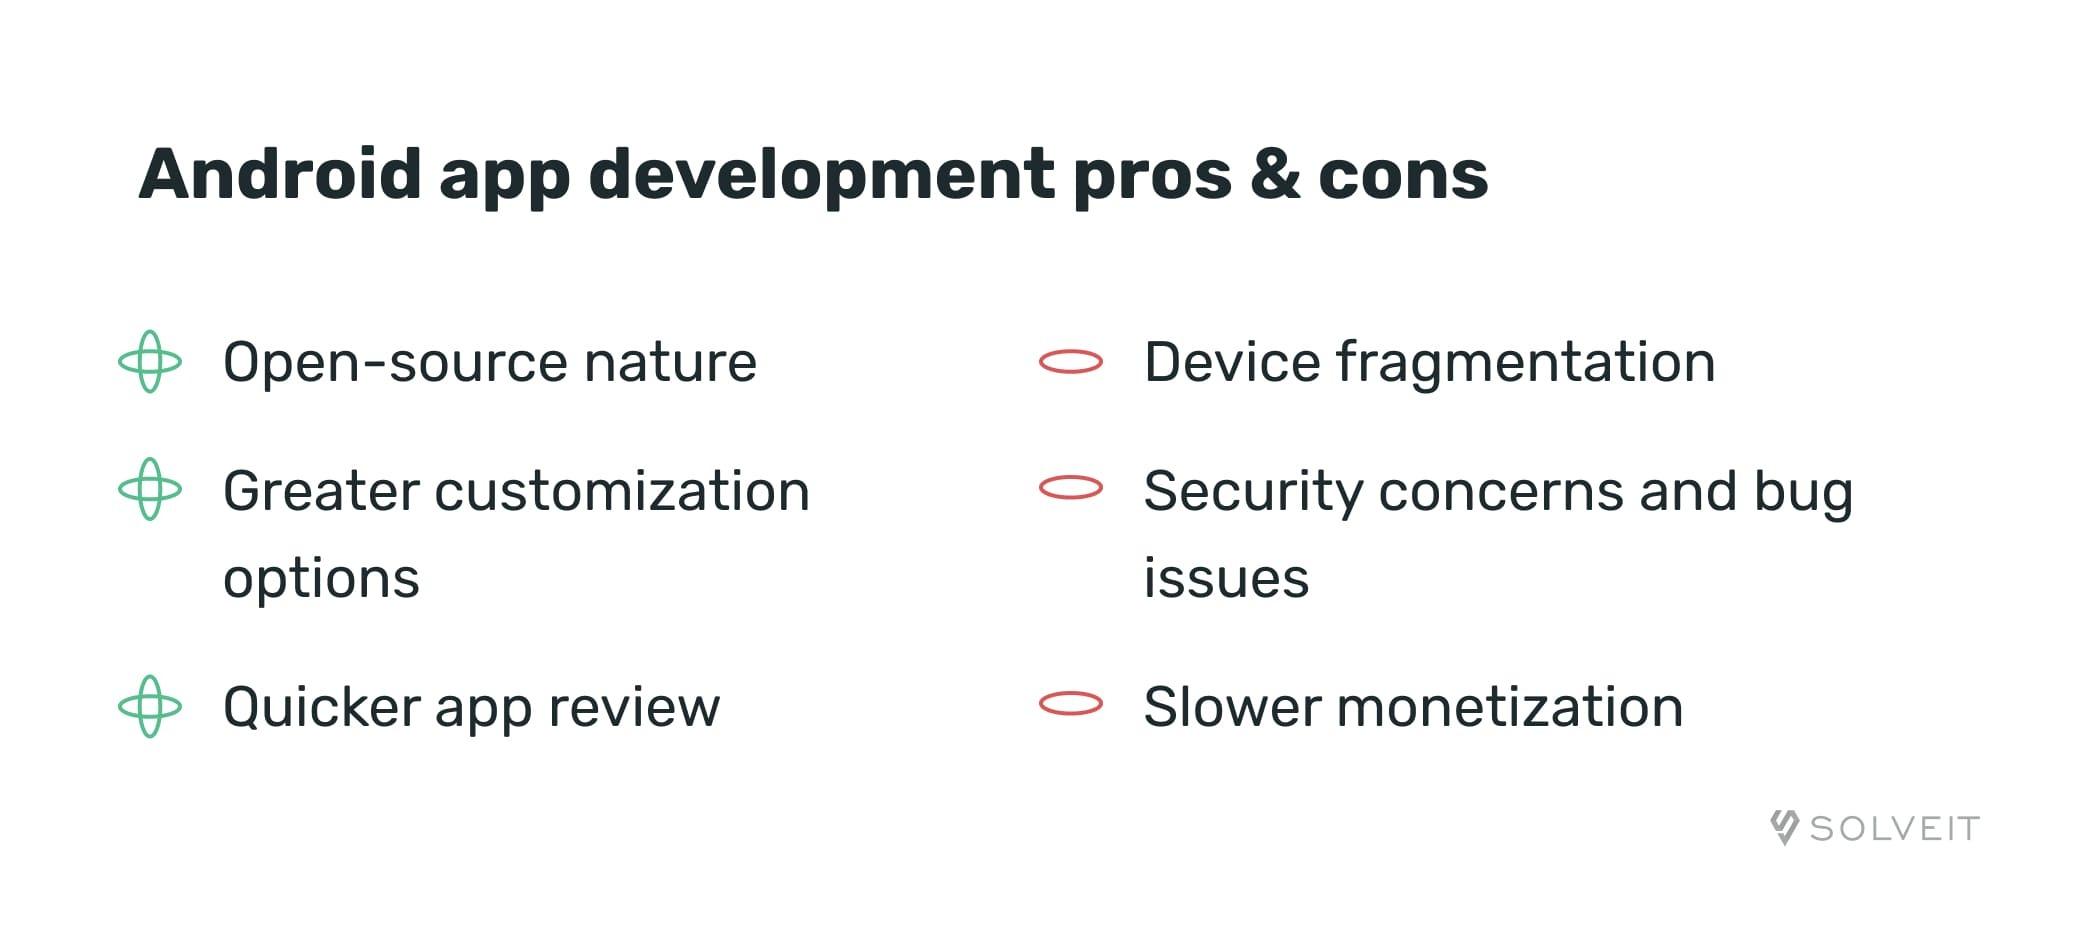 Android app development pros & cons